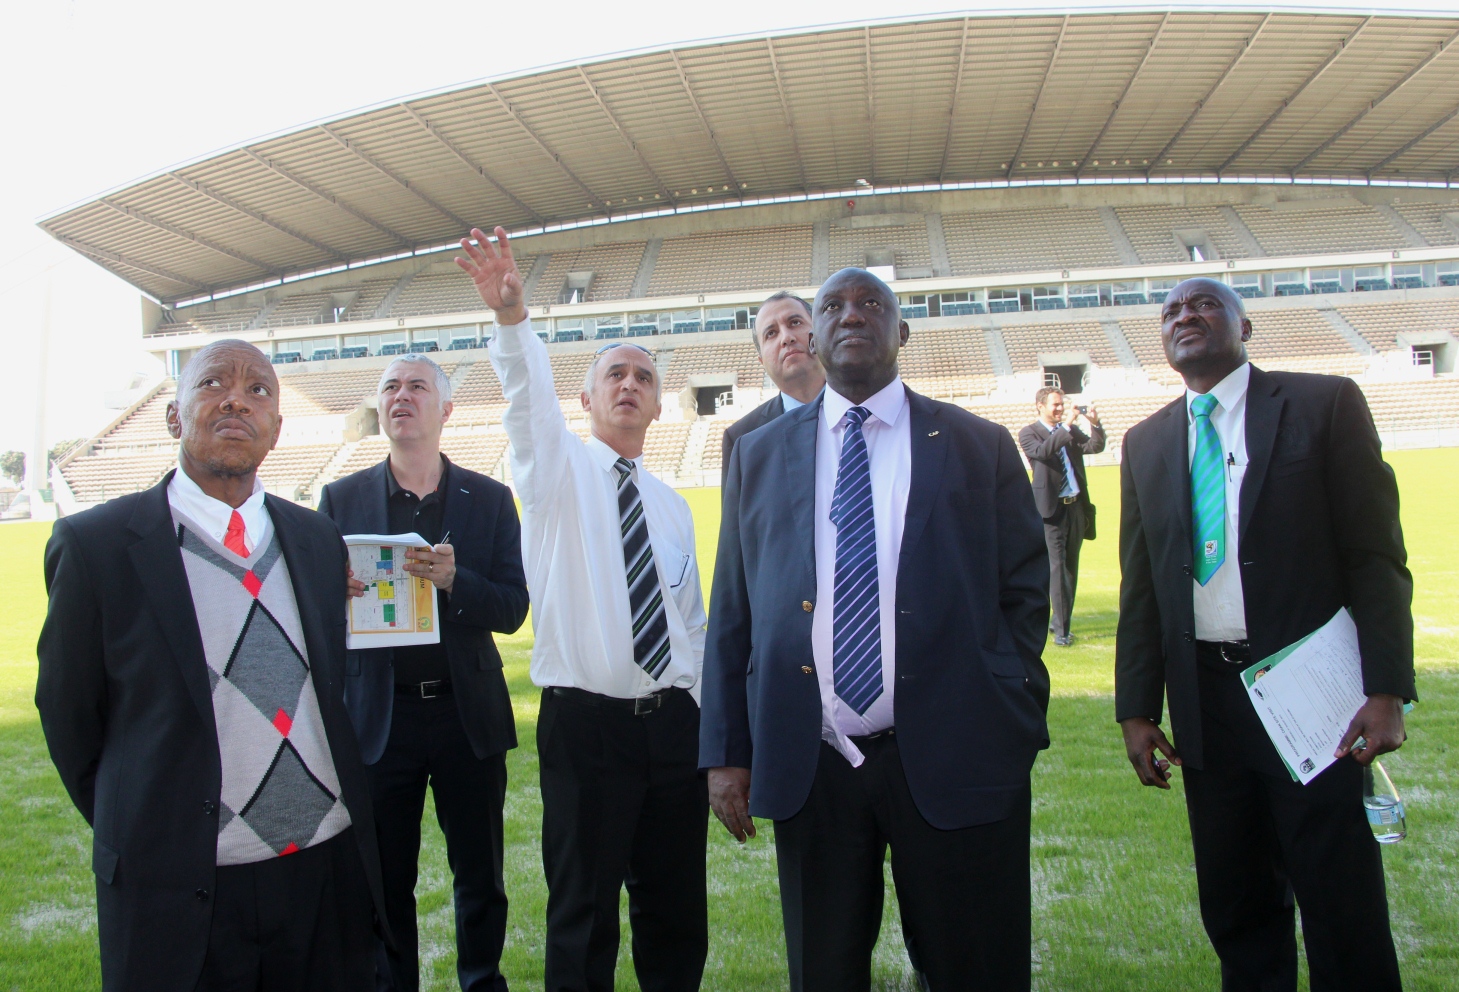 The CAF delegation at the Athlone stadium.